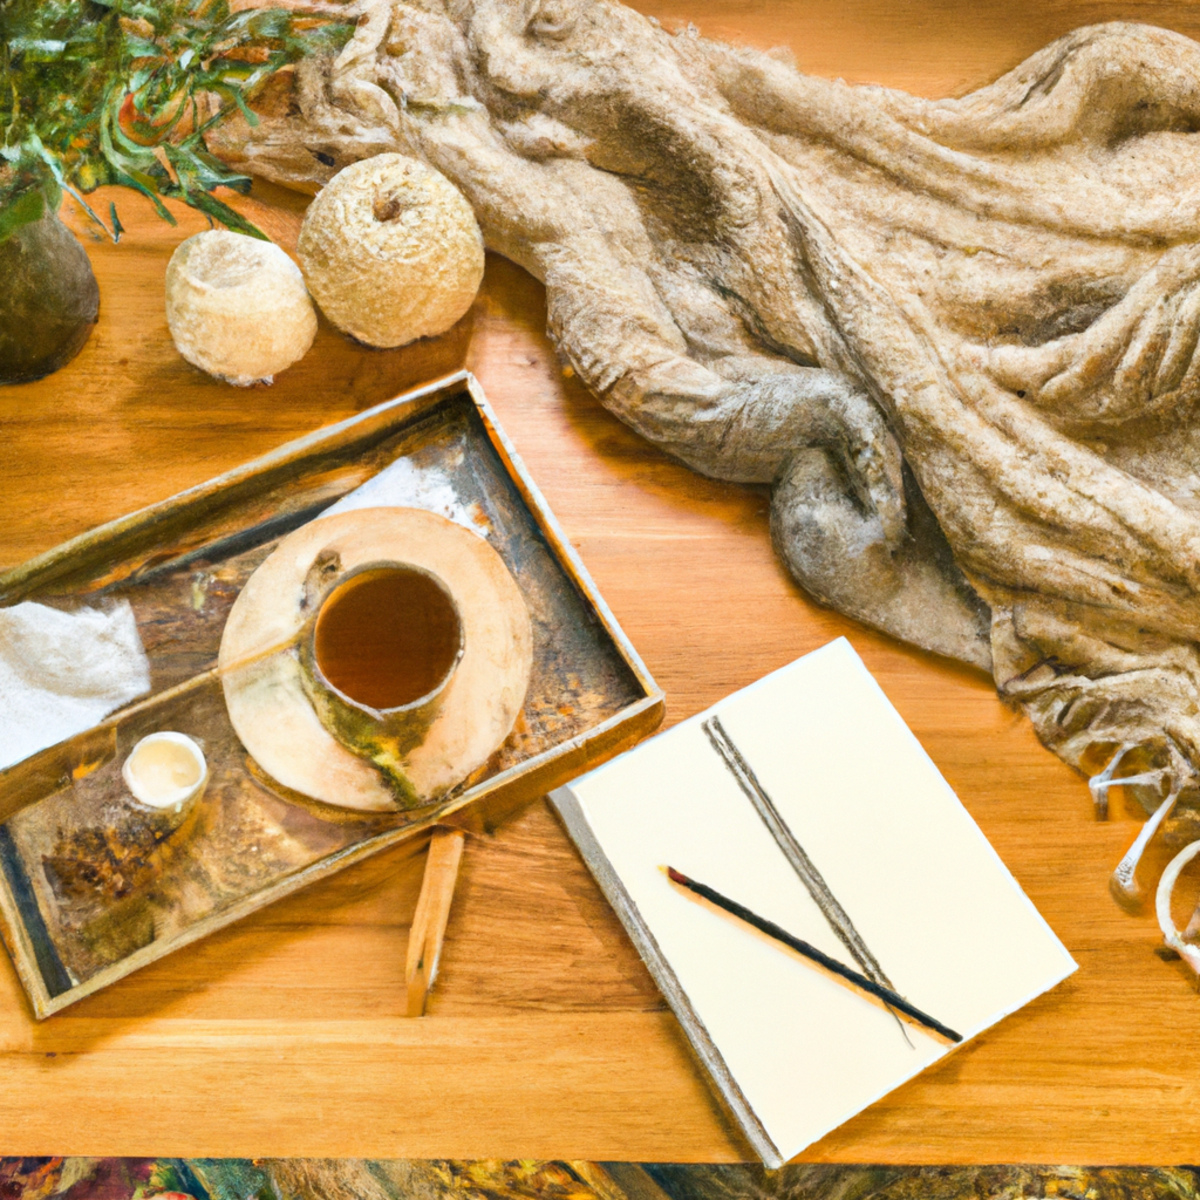 Cozy corner with tea, journal, blanket, flowers, and candle, promoting self-care and relaxation.